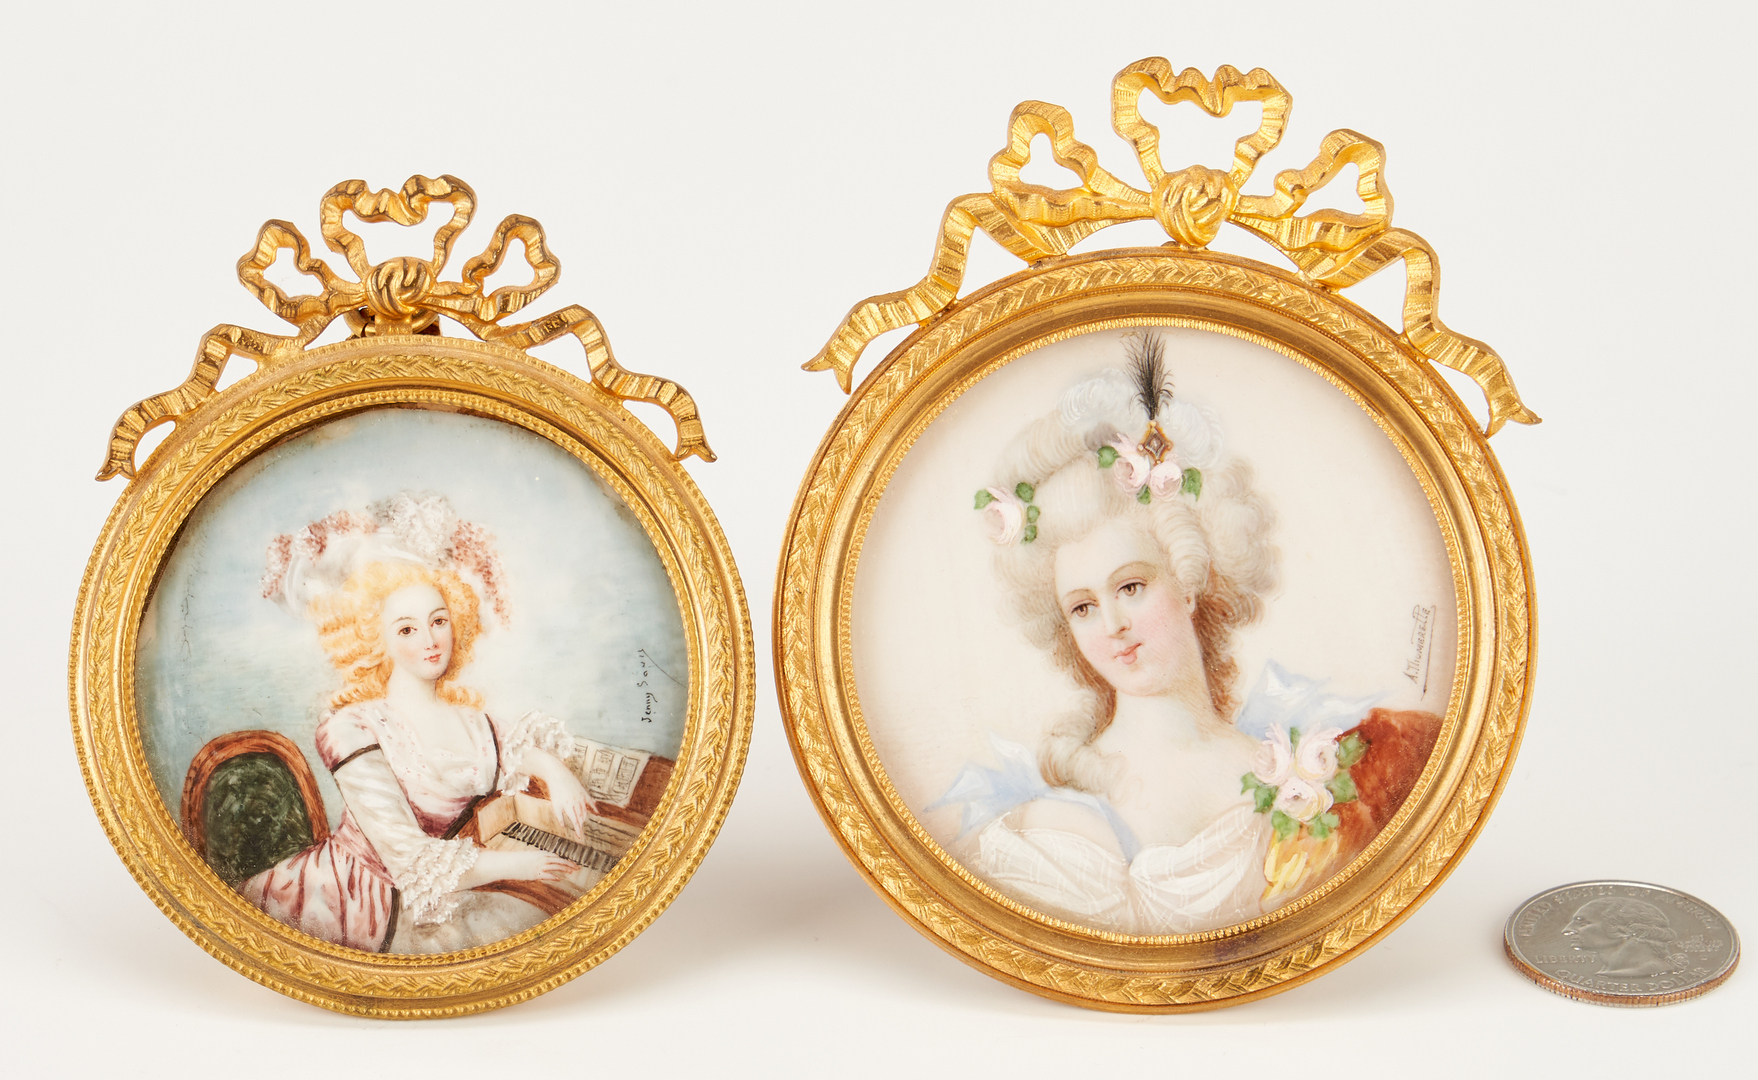 Lot 79: Pair of Framed French Miniature Portraits, Signed